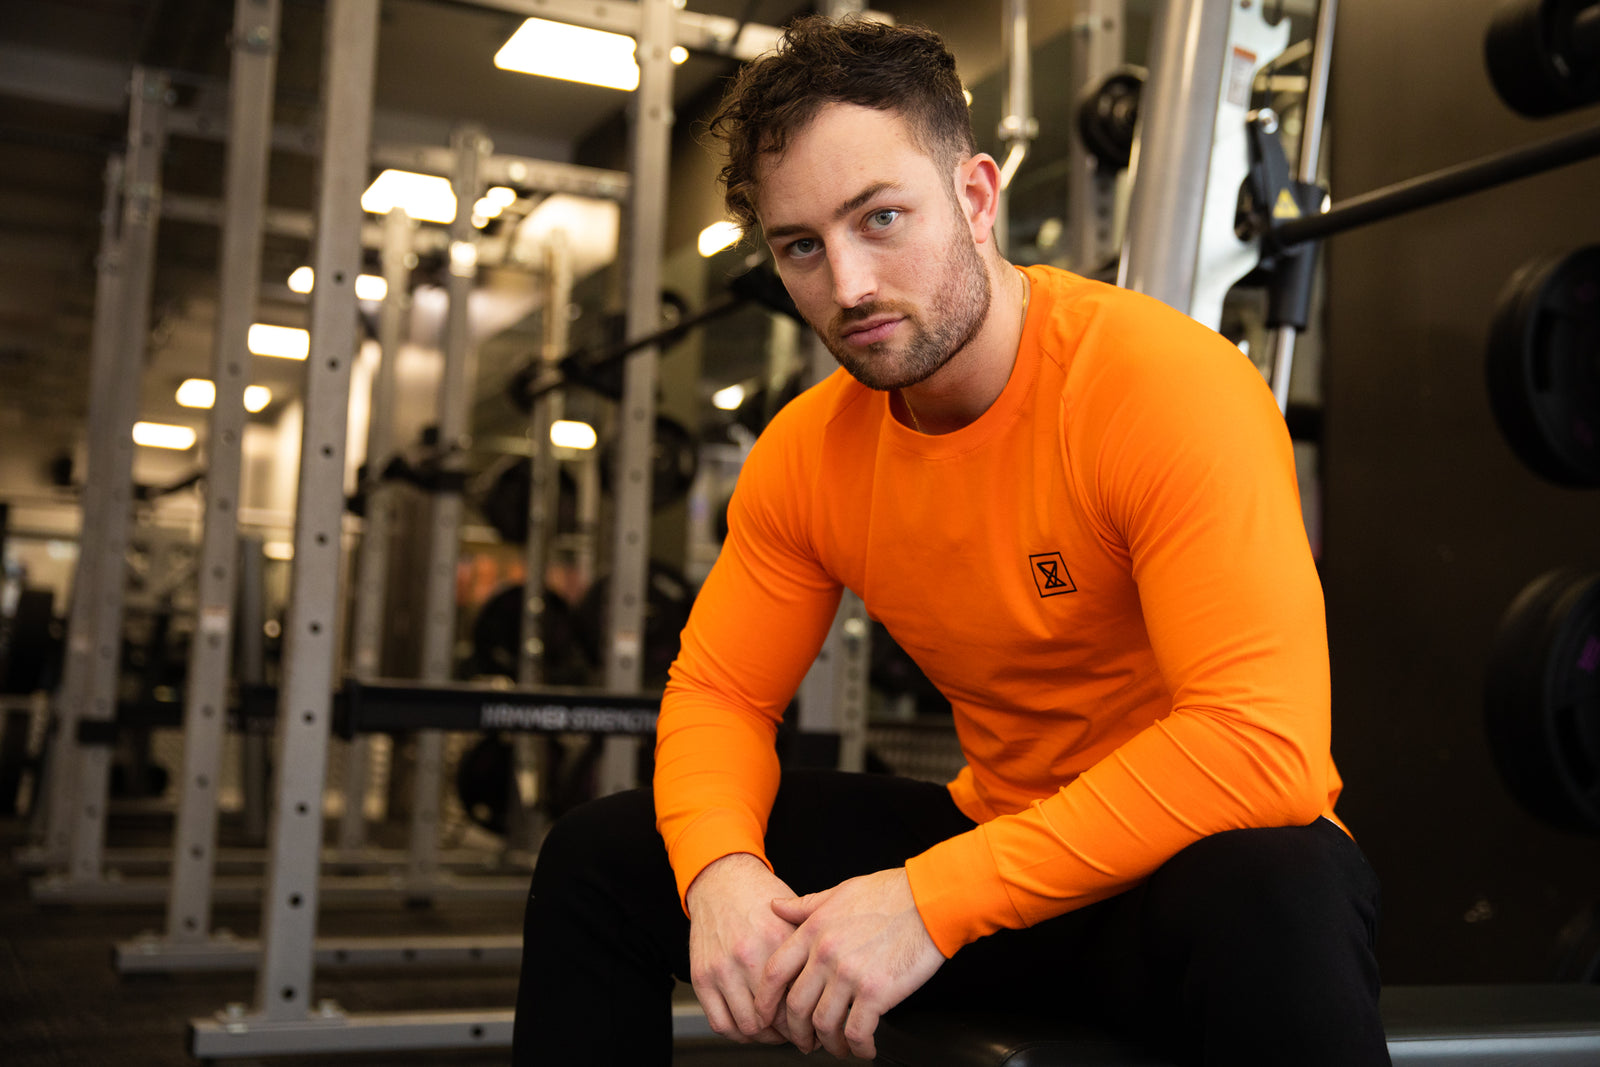 Men's Workout Outfits - Online Store